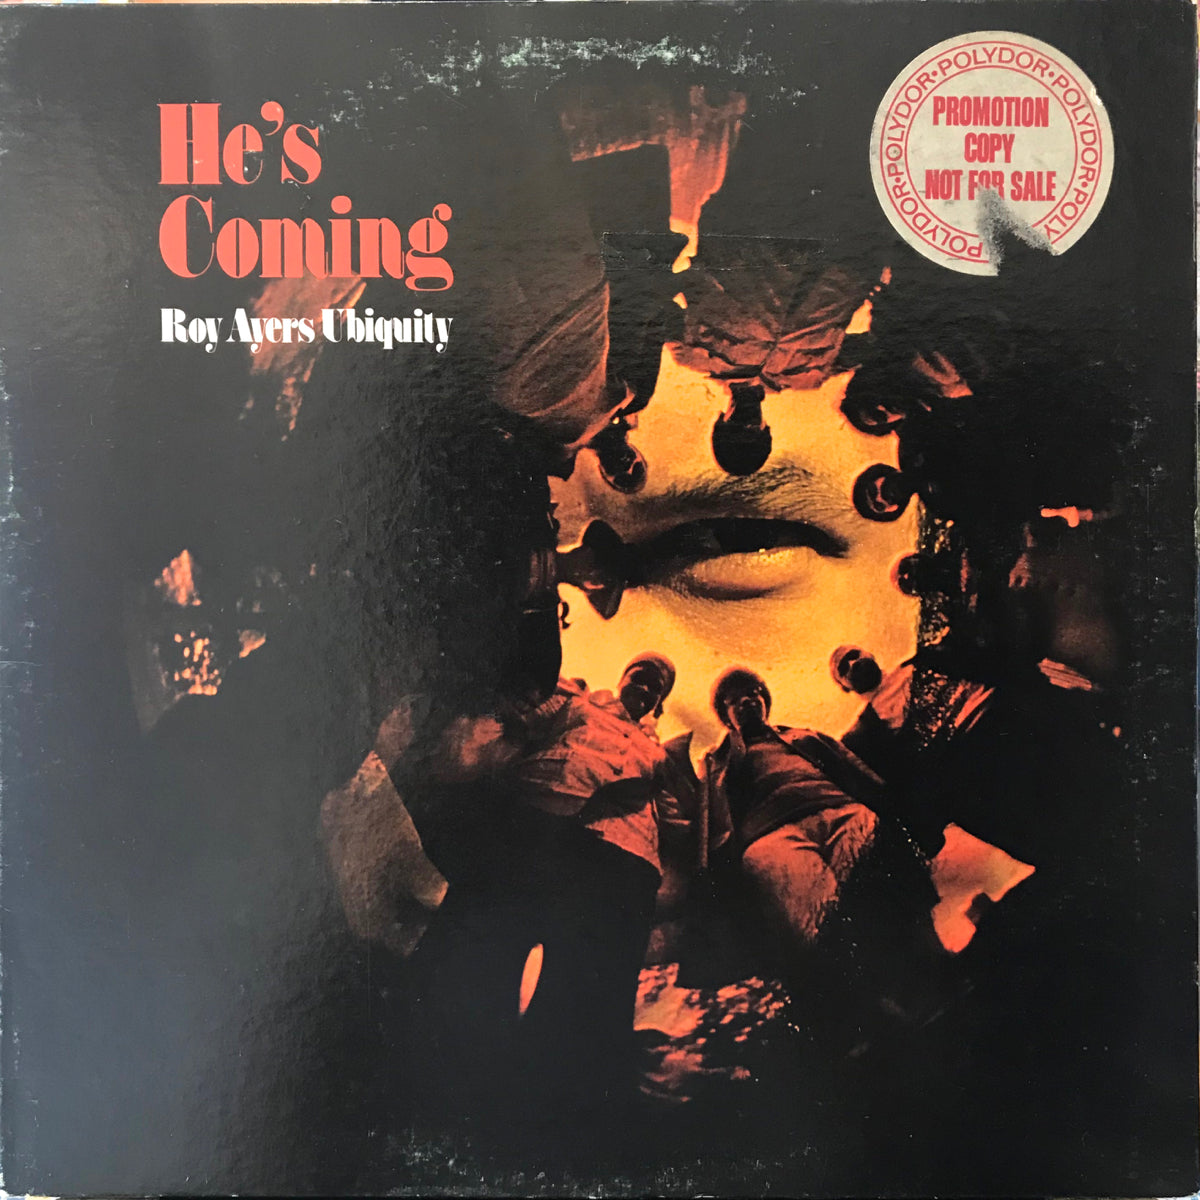 Roy Ayers Ubiquity / He's Coming | VINYL7 RECORDS